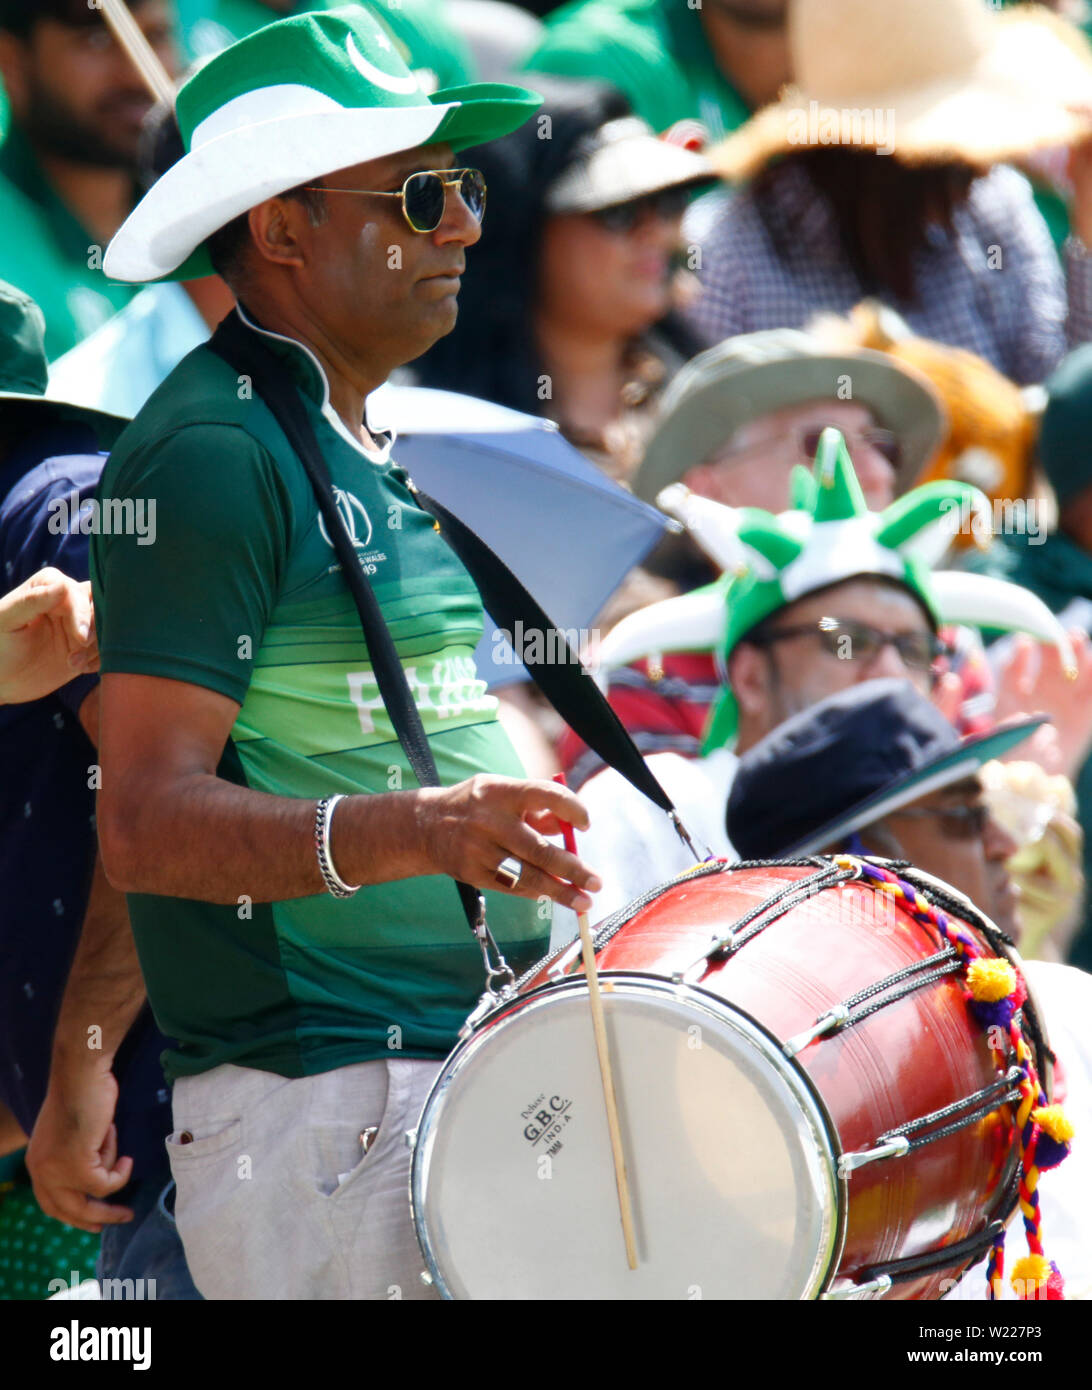 London, UK. 05th July, 2019. LONDON, England. July 05: Pakistan Fans during ICC Cricket World Cup between Pakinstan and Bangladesh at the Lord's Ground on 05 July 2019 in London, England. Credit: Action Foto Sport/Alamy Live News Stock Photo